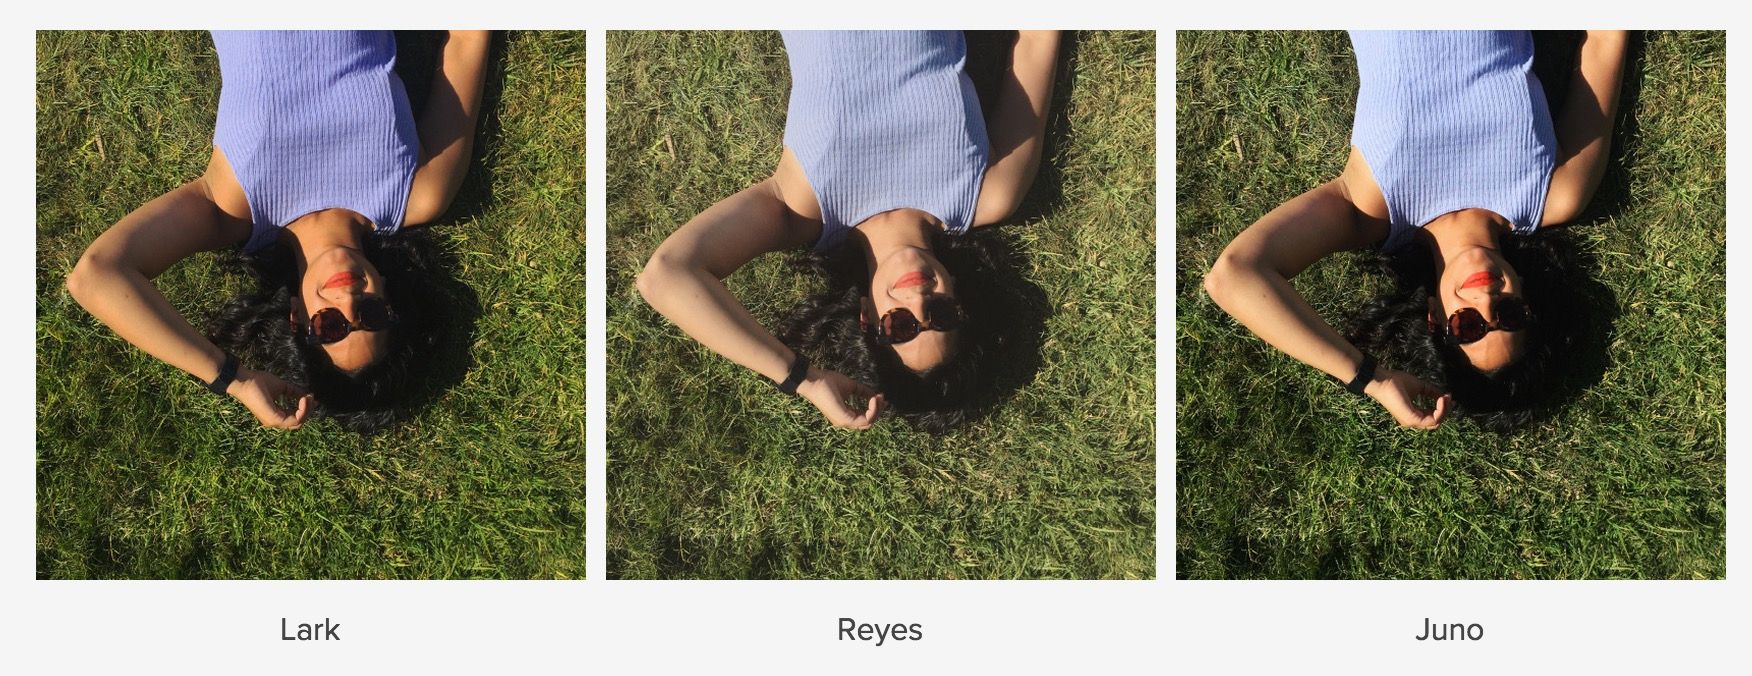 instagram adds new lark reyes and juno filters here s what they can do to your photos image 2